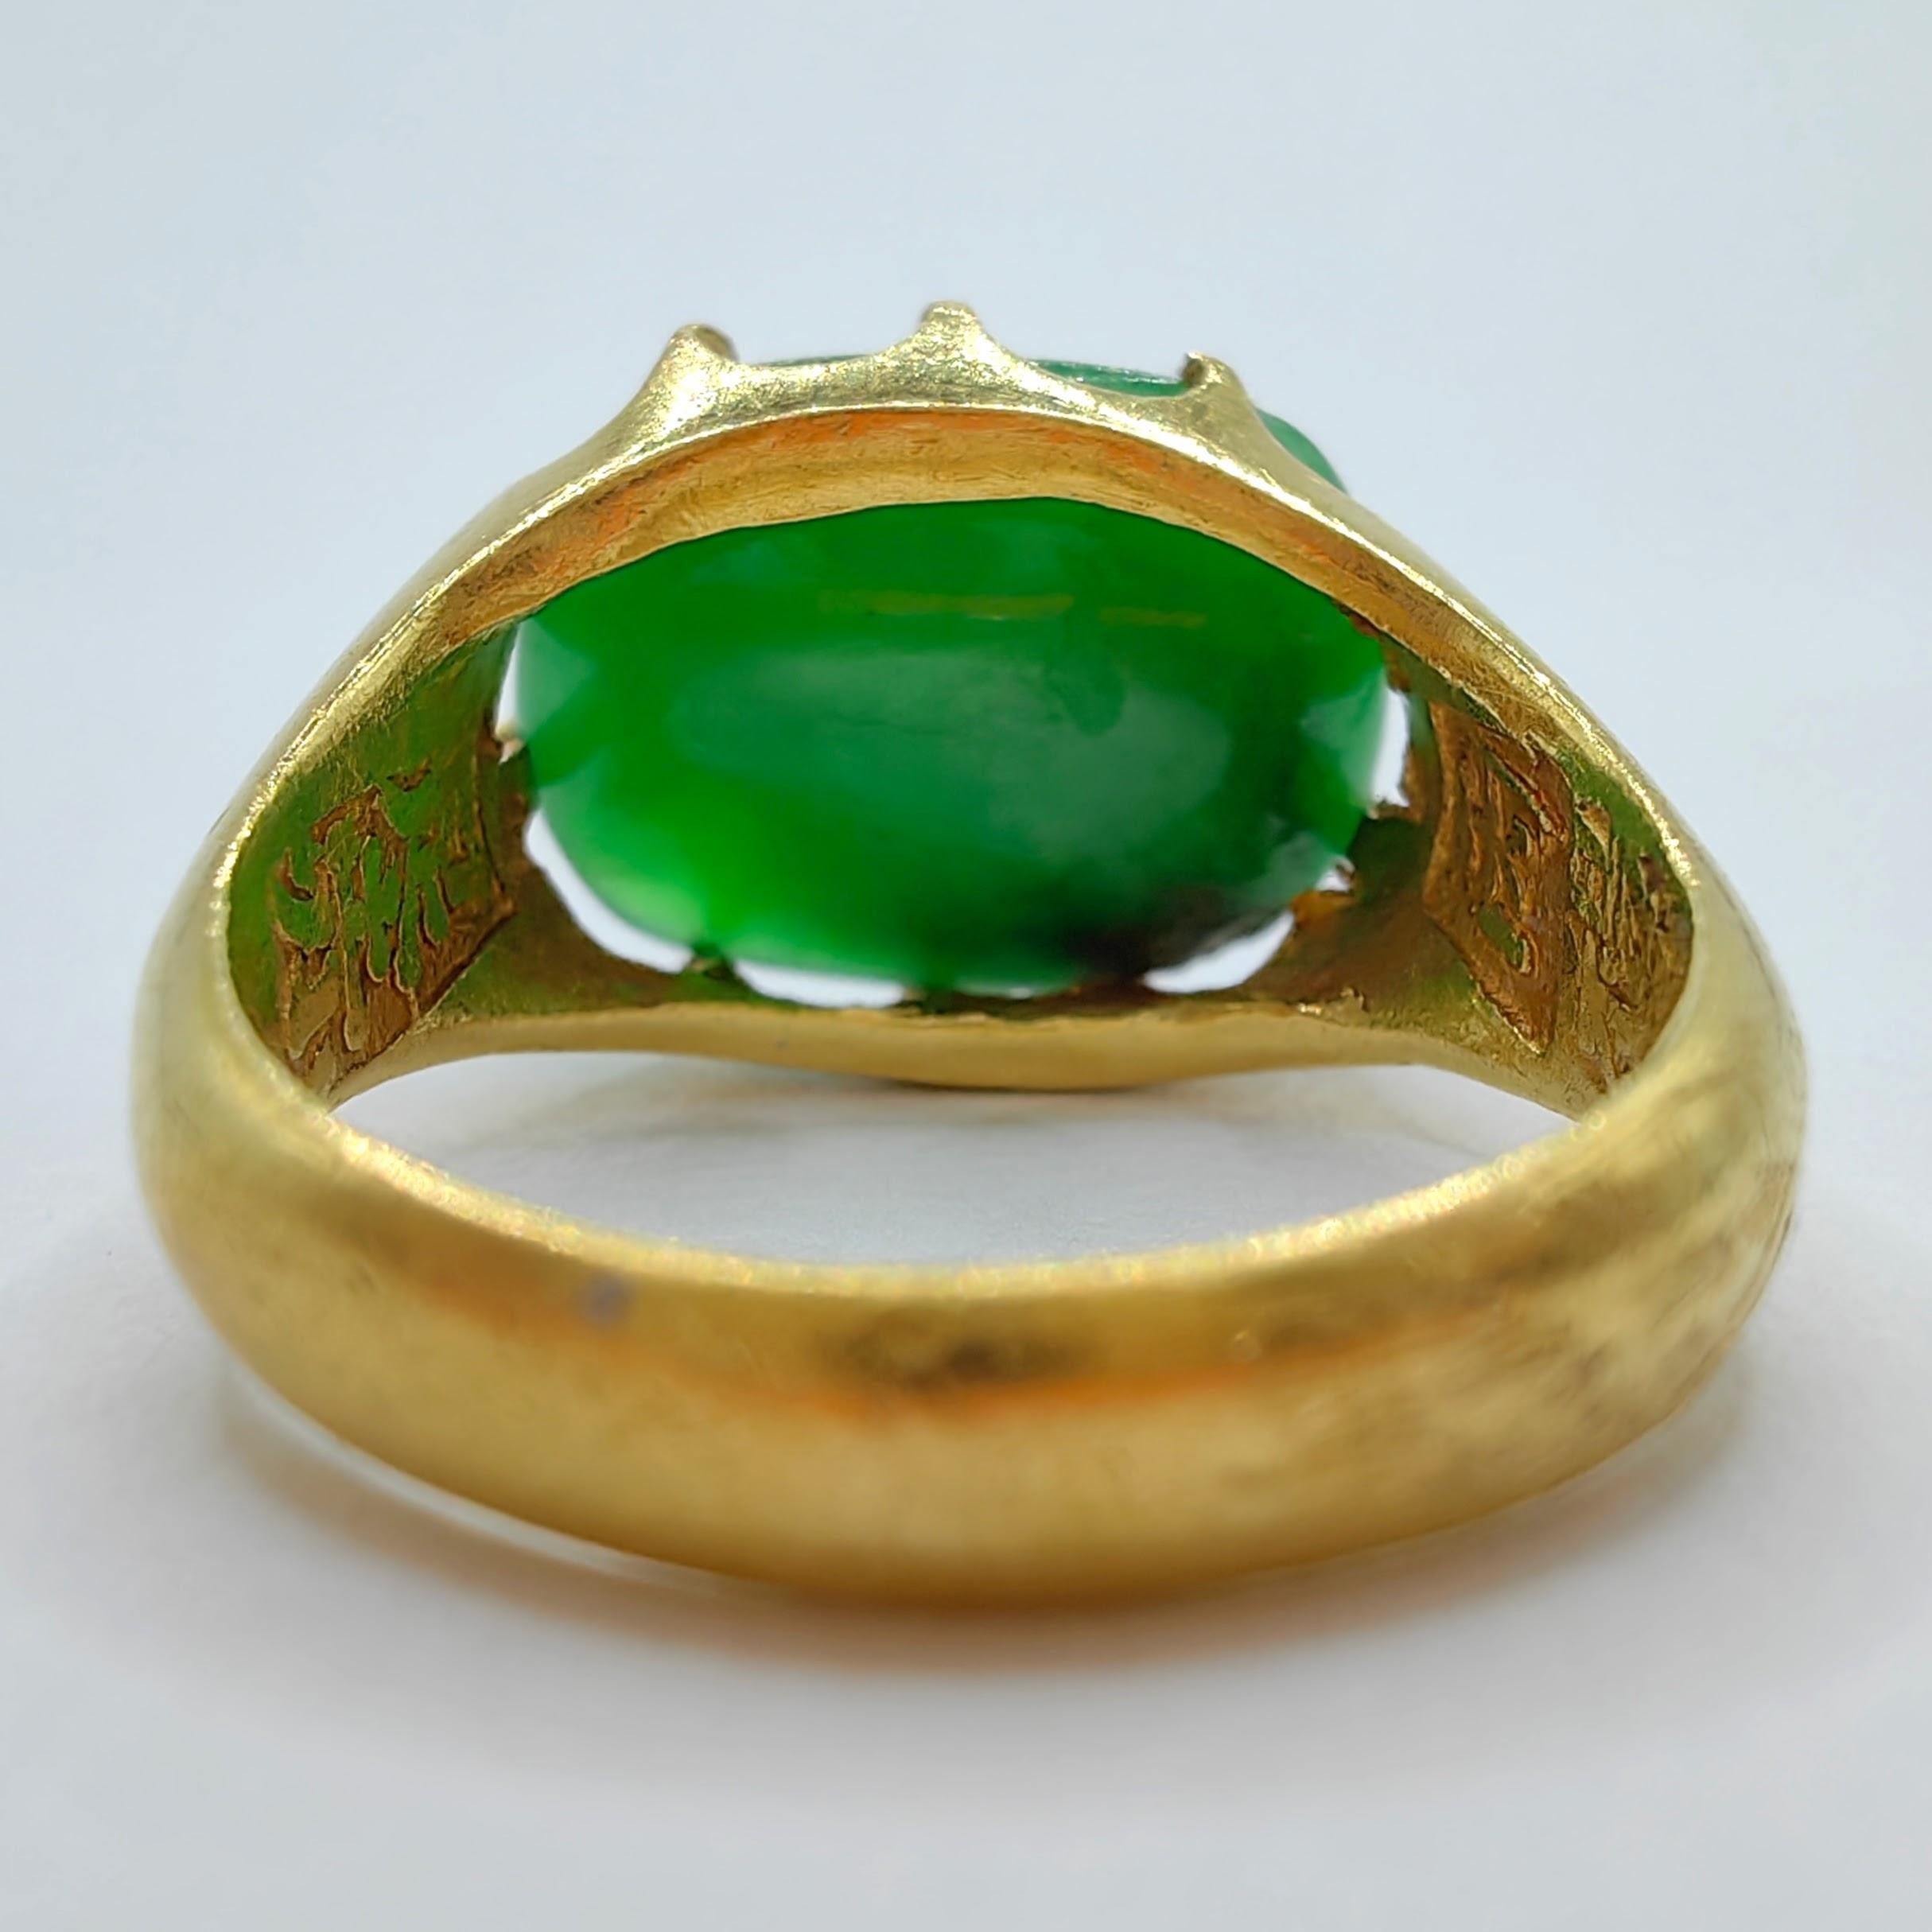 Antique Imperial Green Cabochon Jadeite Jade 24K Yellow Gold Pinky Finger Ring For Sale 1